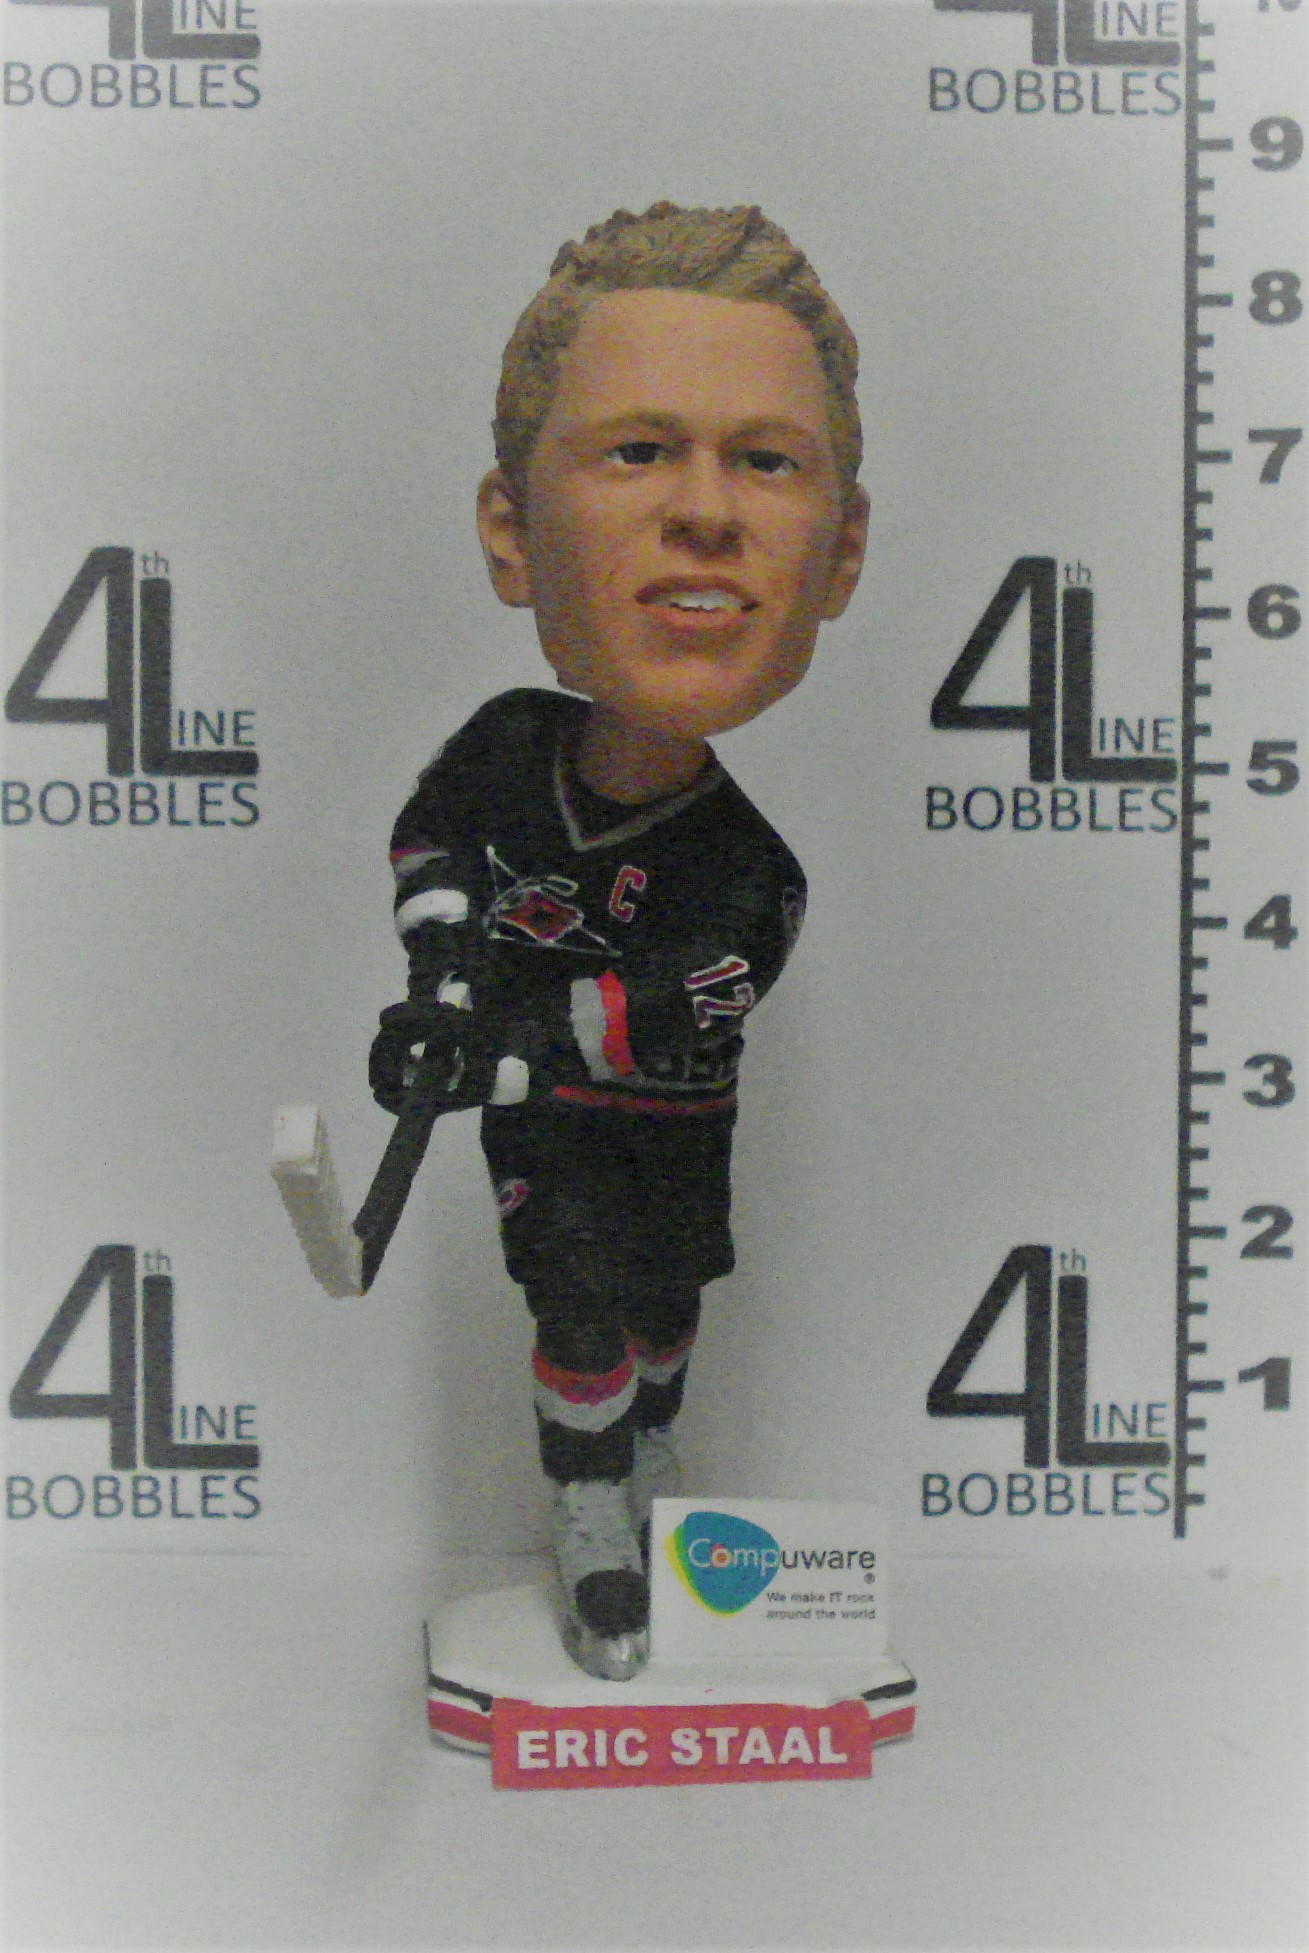 Eric Staal bobblehead